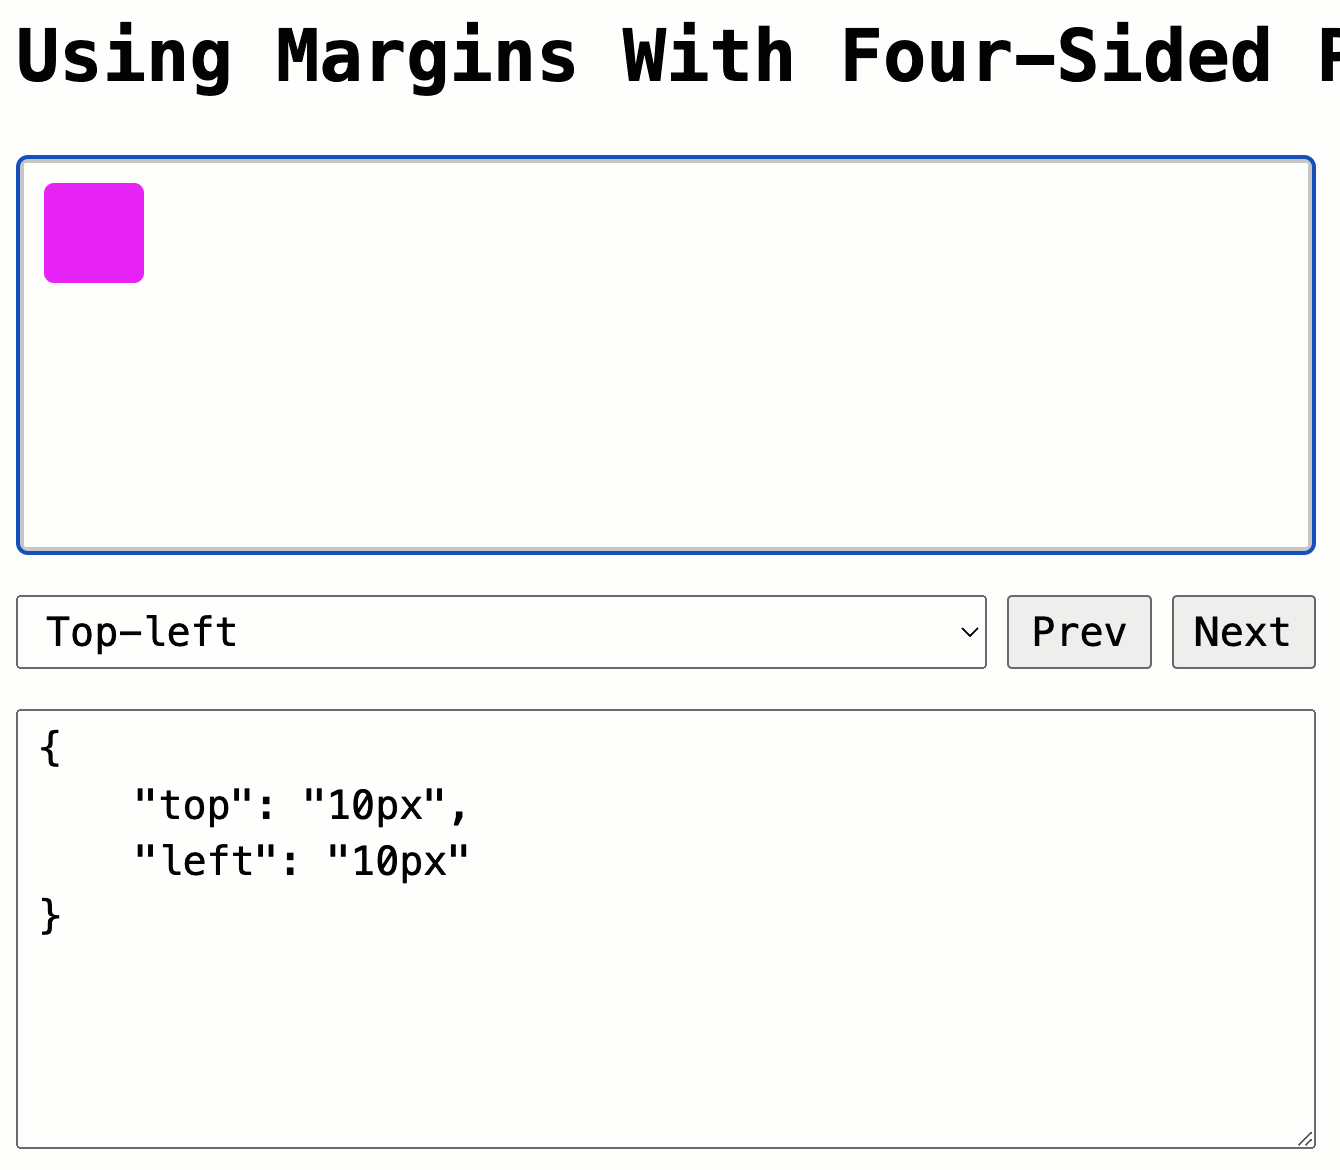 A positioned box being moved around the screen as the inset values and margins are being adjusted dyamically with Alpine.js.